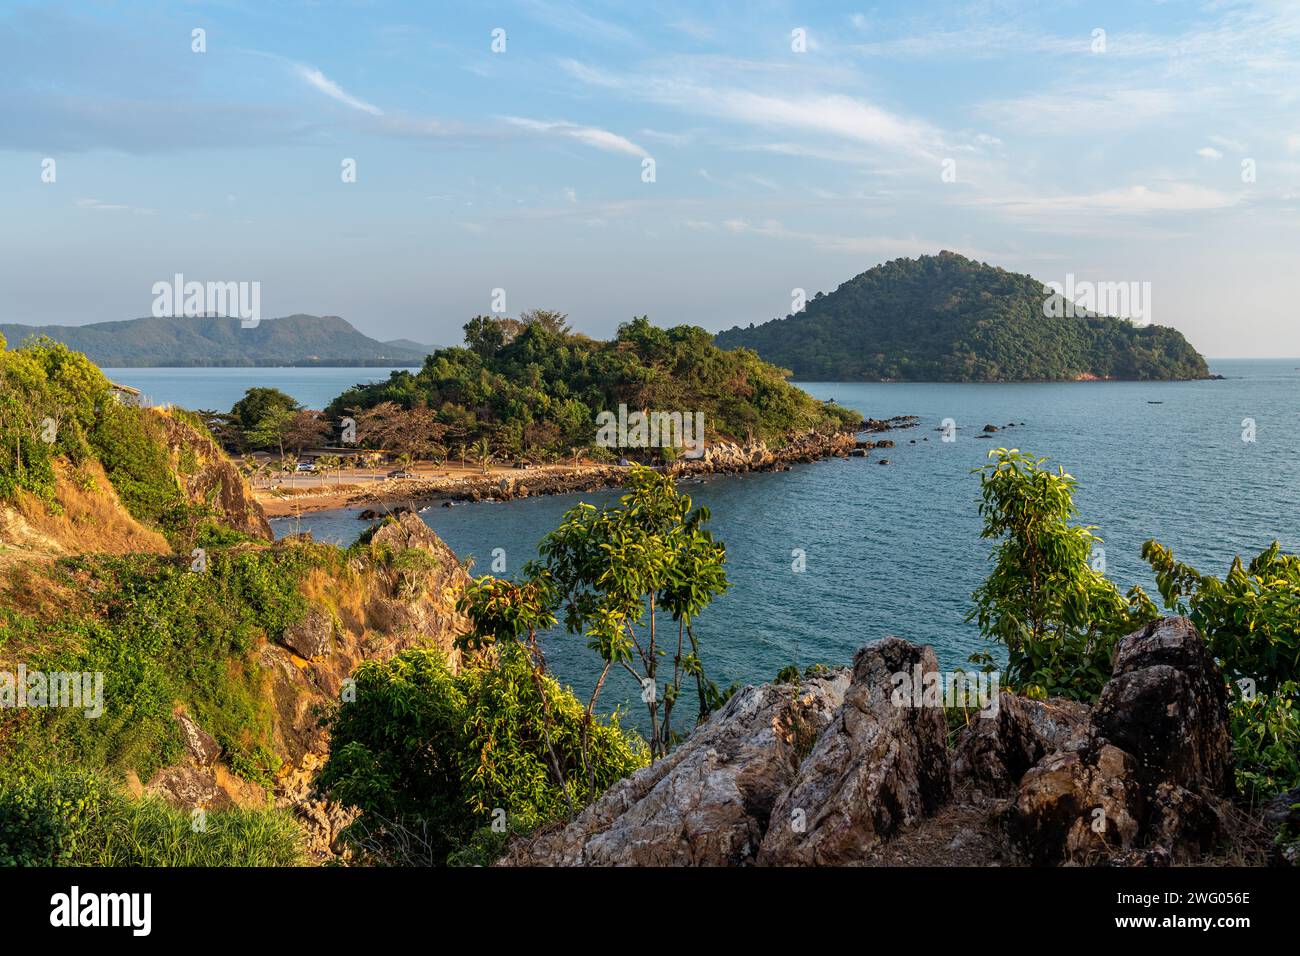 Beautiful view of evening sunset at the Noen Nangphaya view point looking out to the ocean and distant islands in Chonburi, Thailand Stock Photo